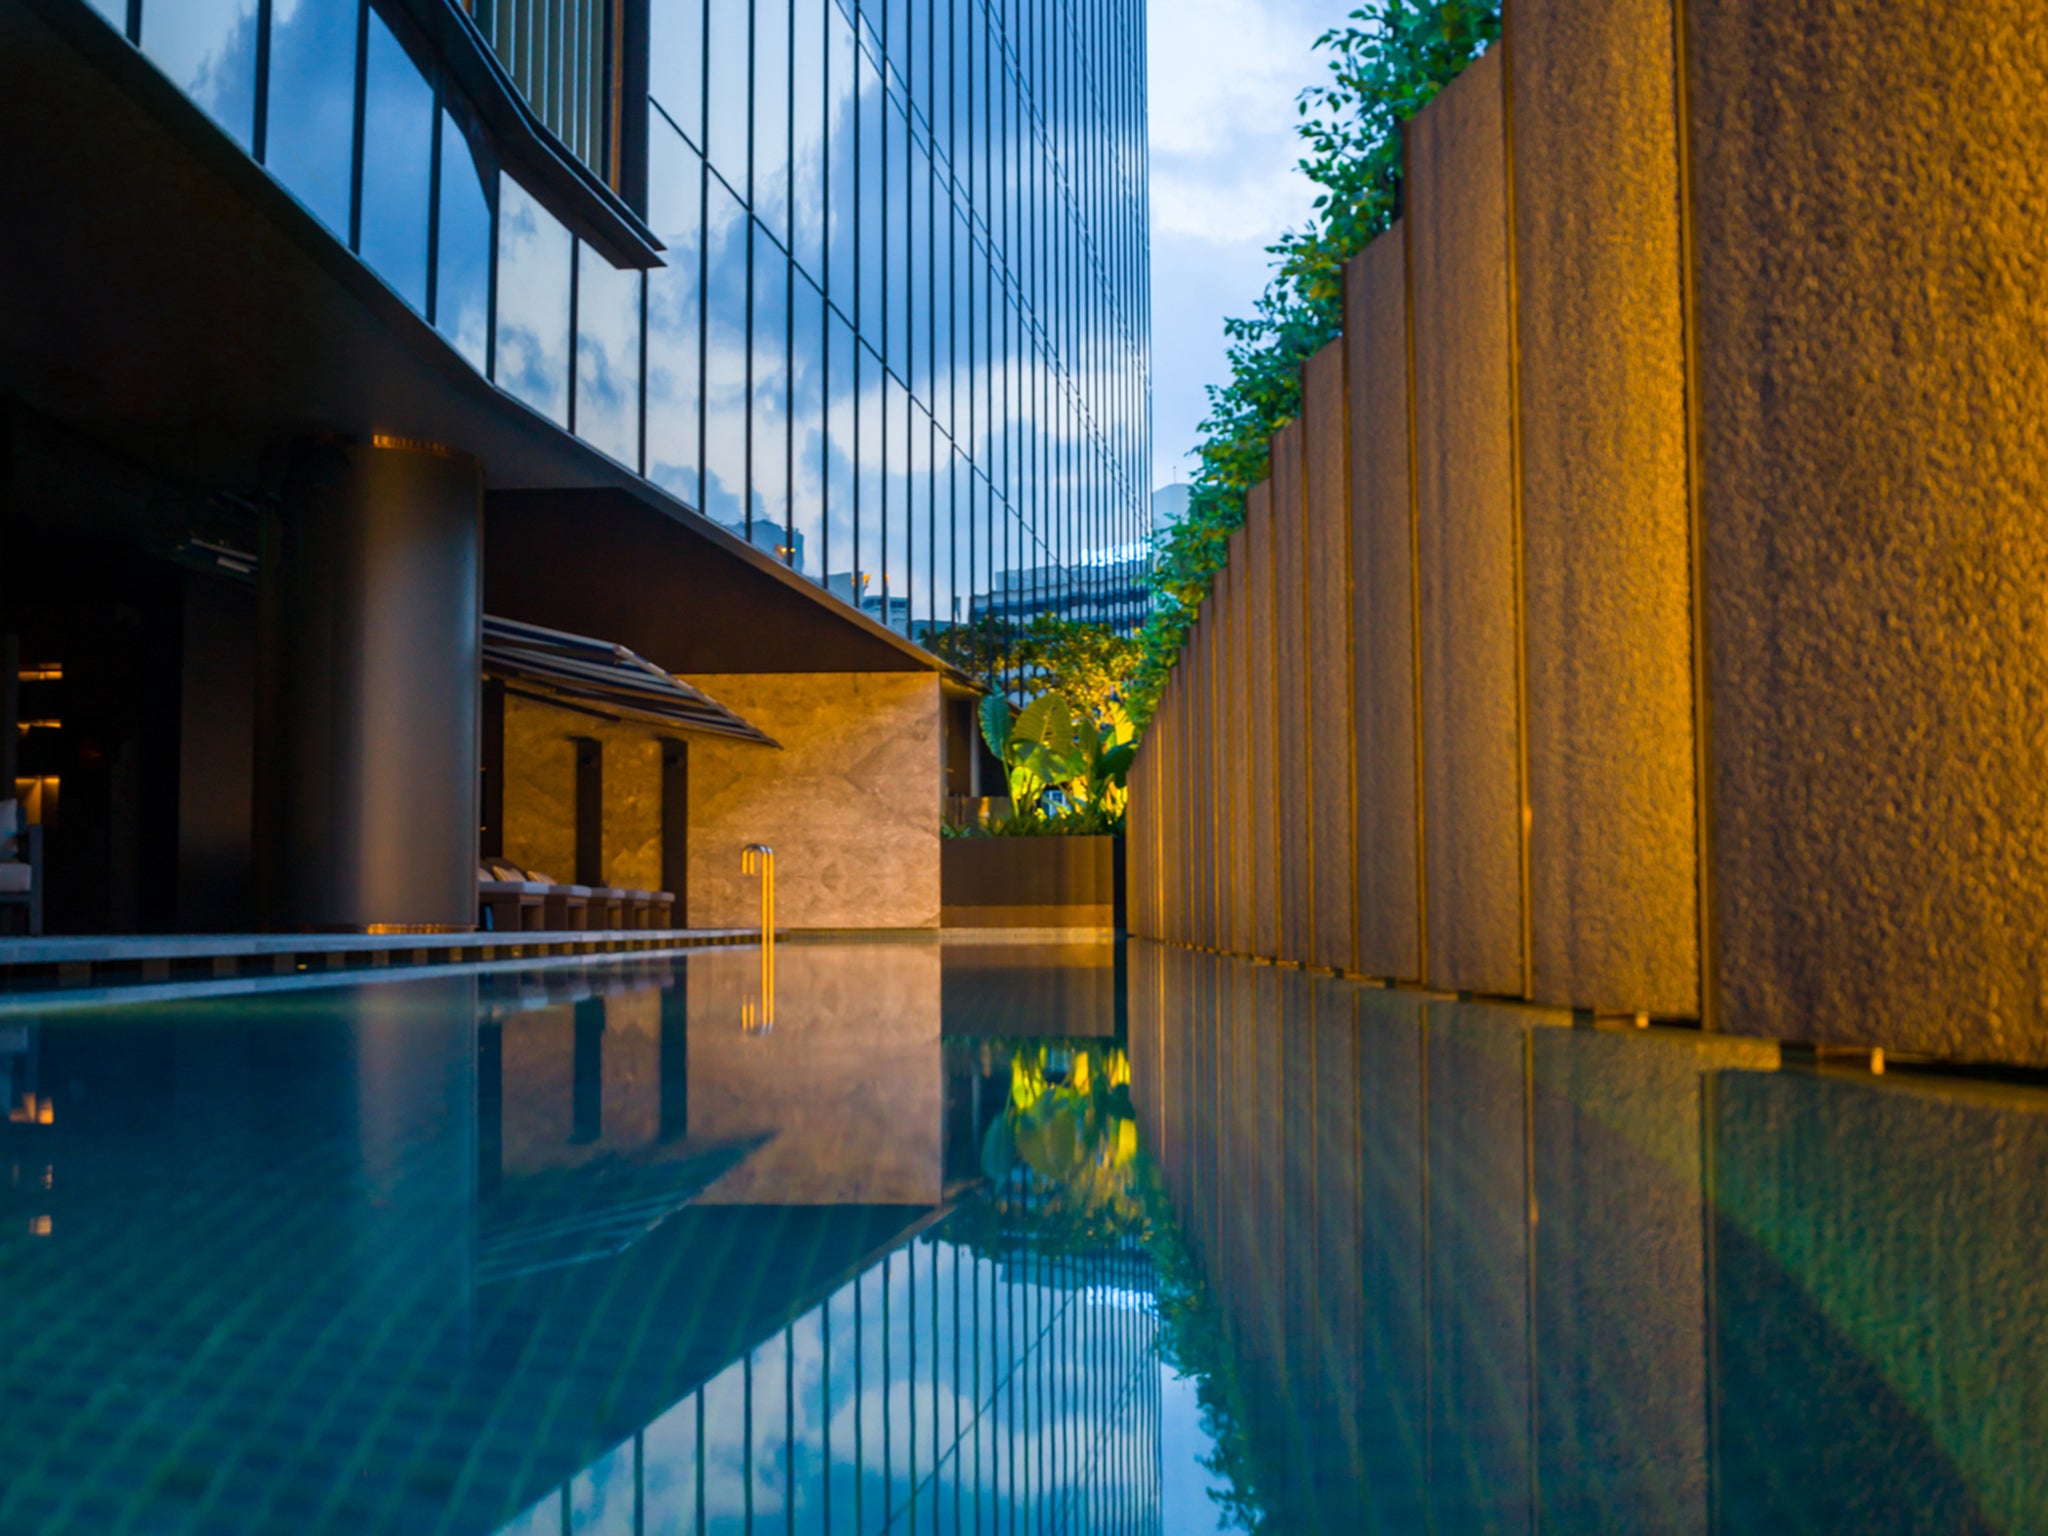 The outdoor swimming pool at St. Regis Singapore